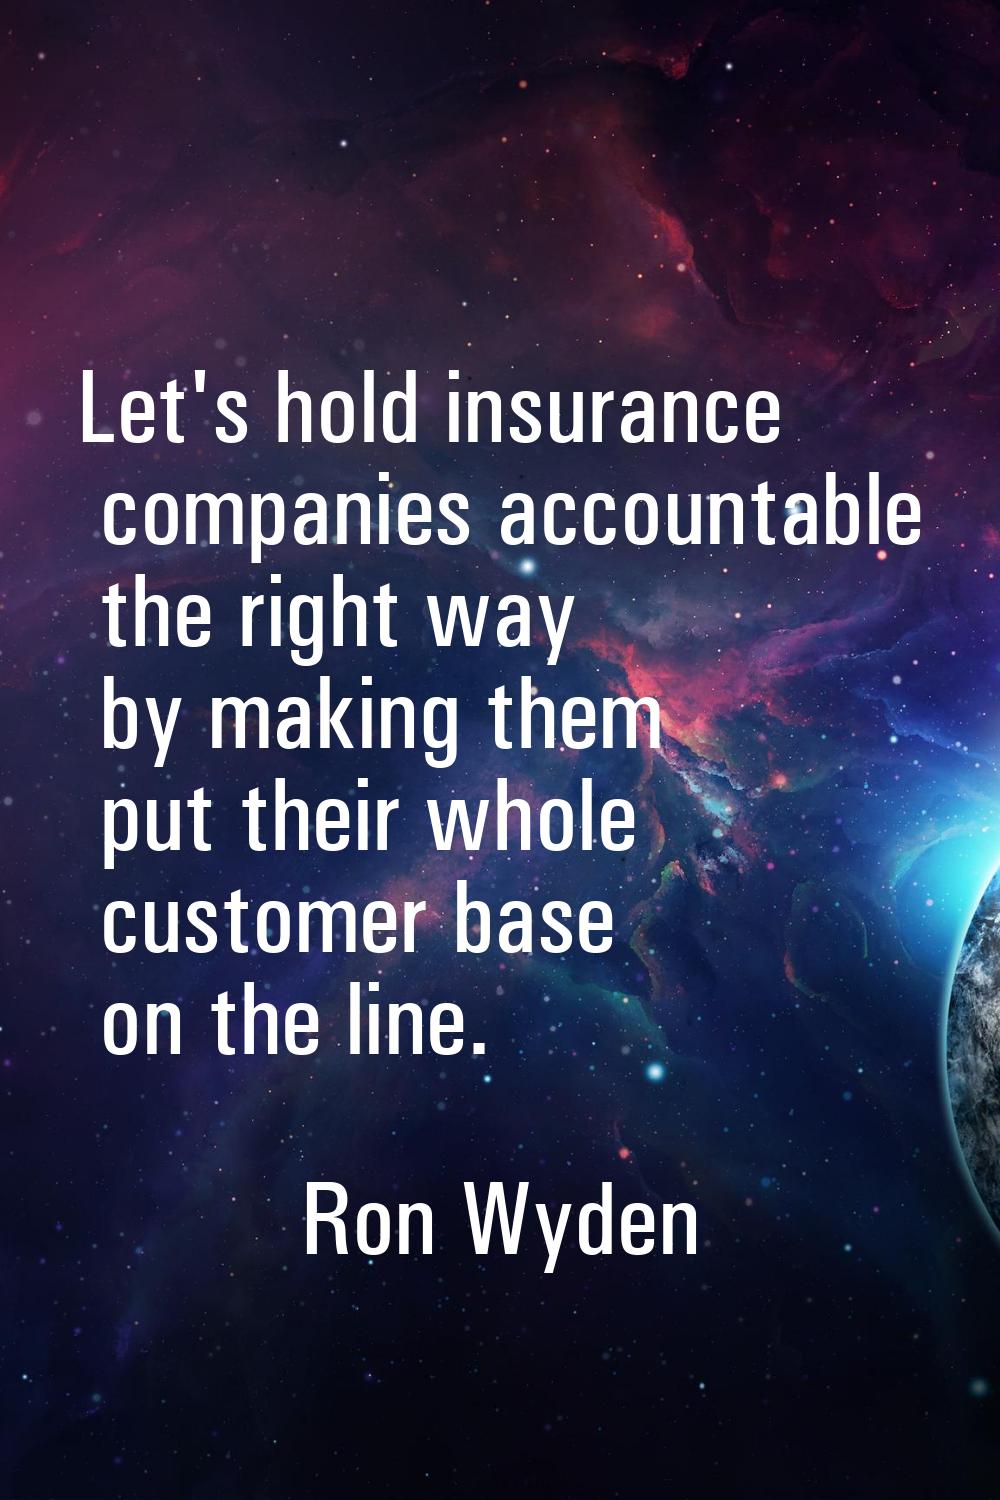 Let's hold insurance companies accountable the right way by making them put their whole customer ba